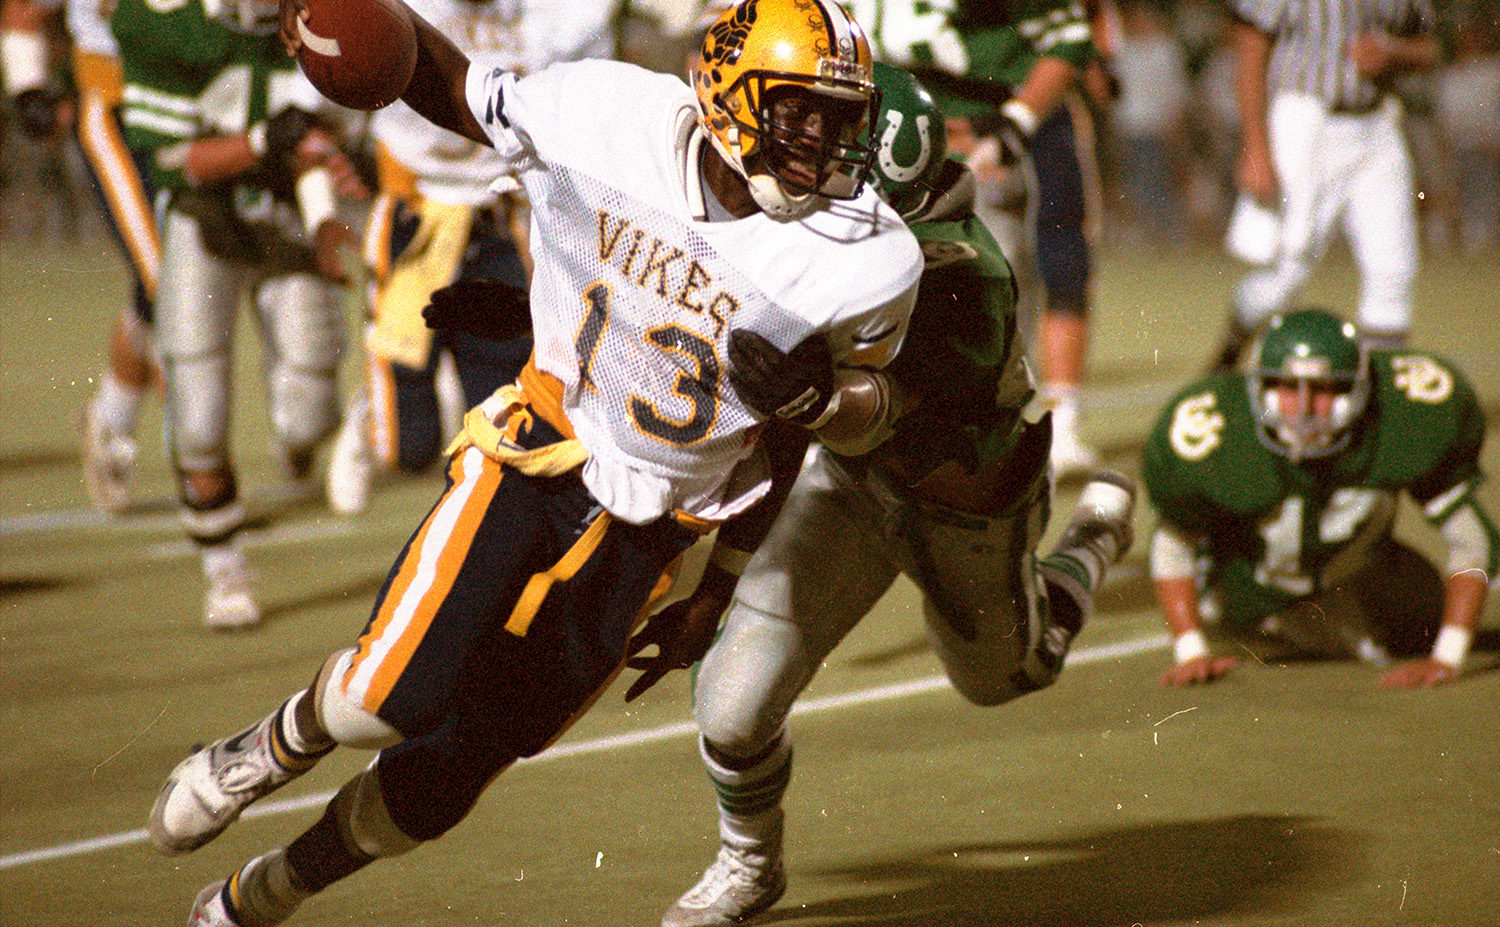 A young football player runs with the ball with an opposing player hot on his trail.